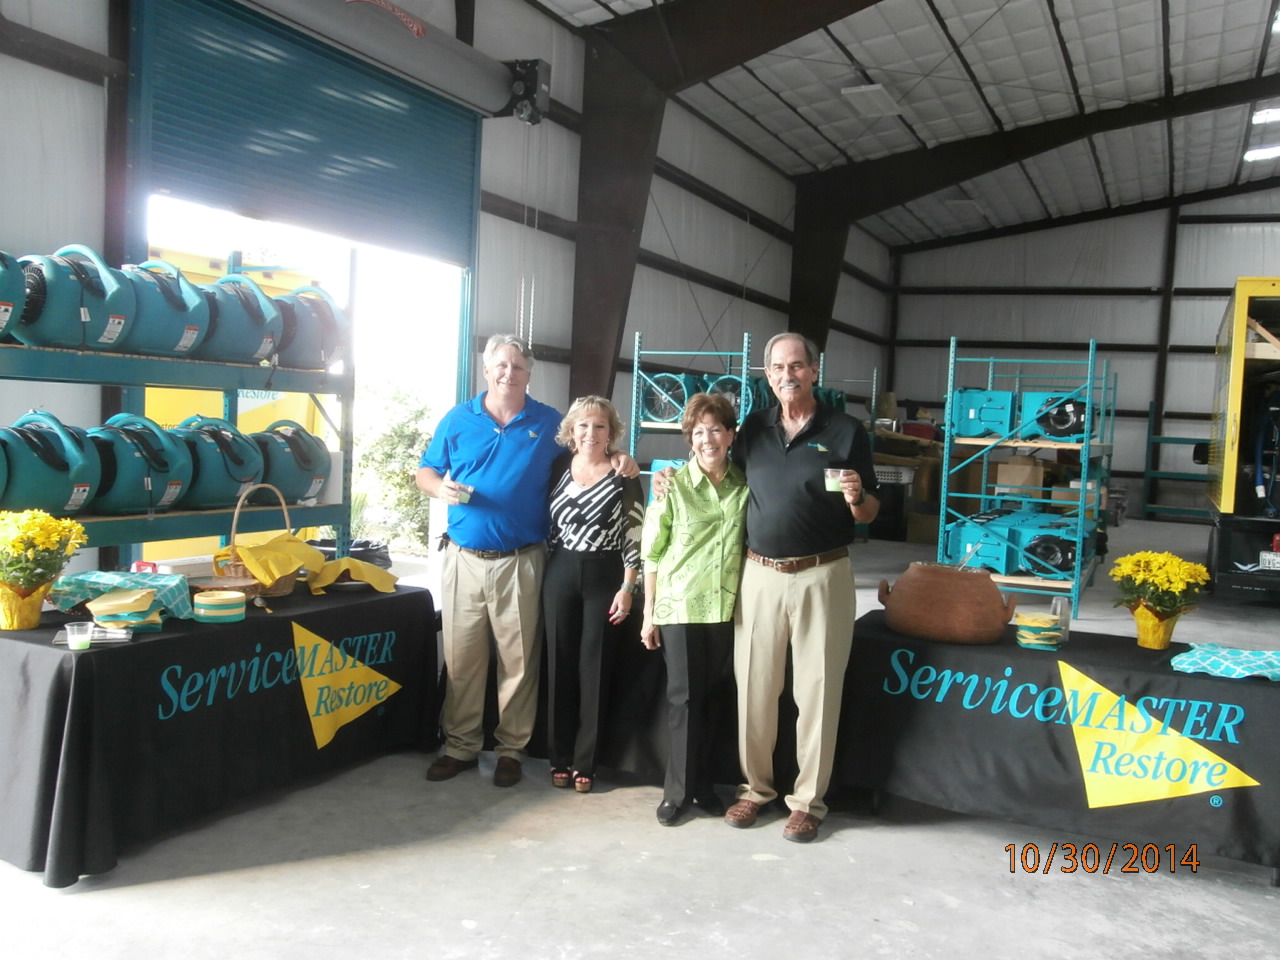 Grand opening celebration for ServiceMaster All Pro in McAllen, TX